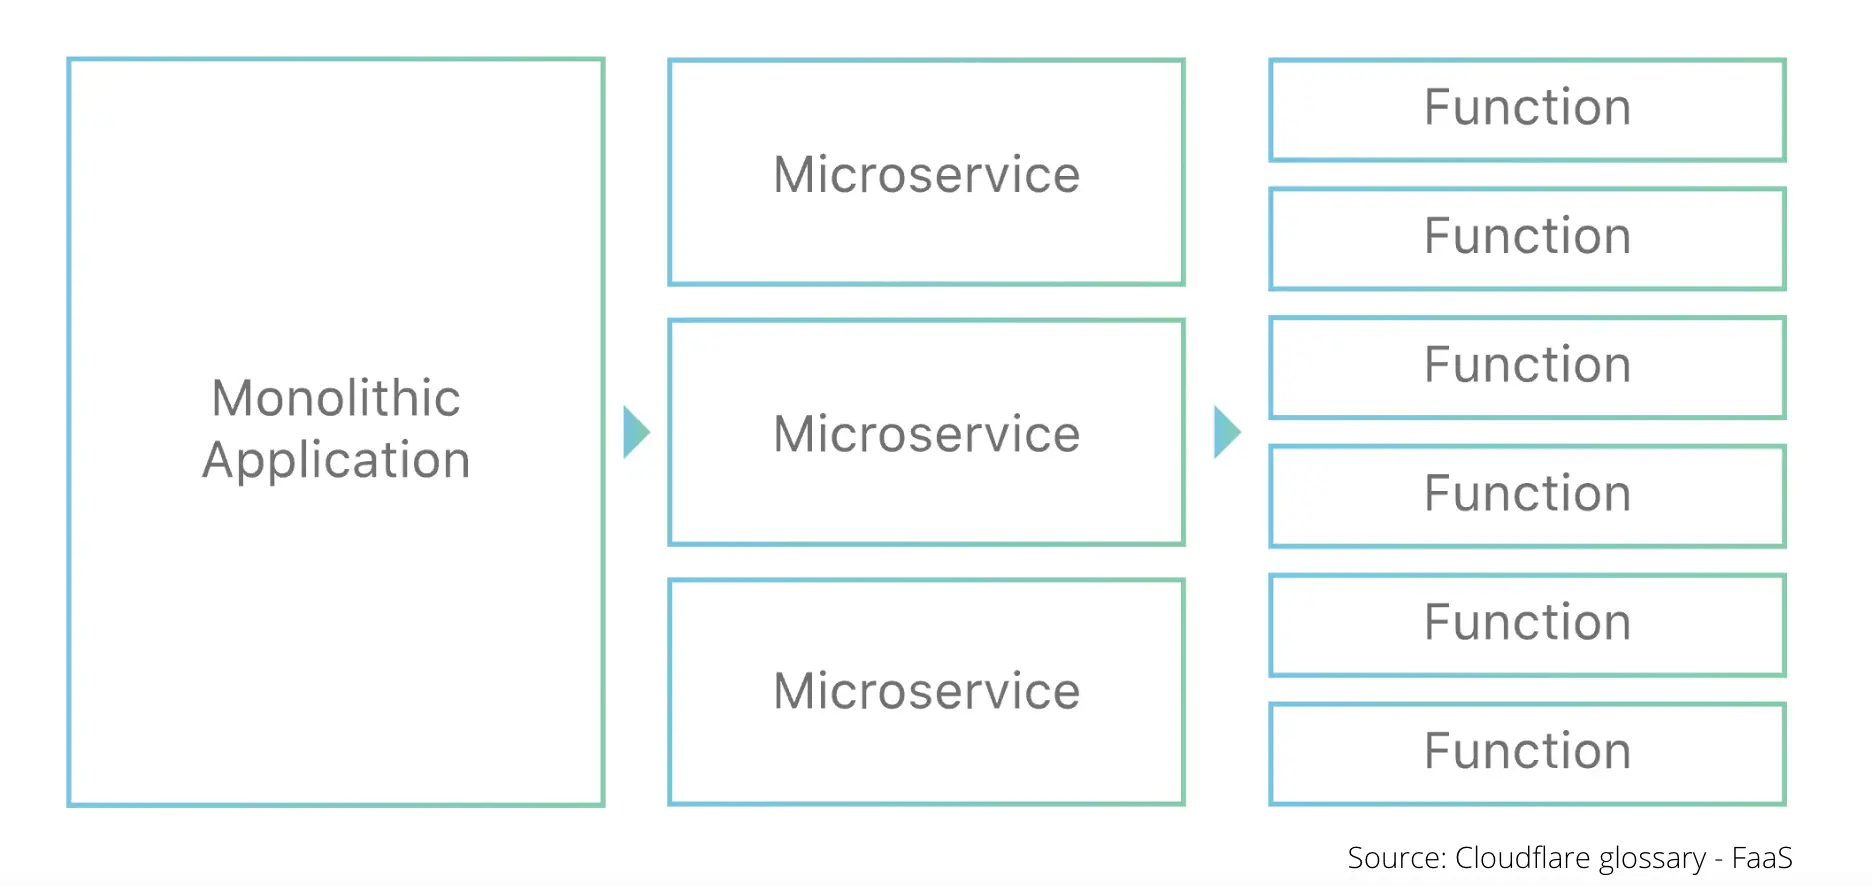 Microservices & Functions